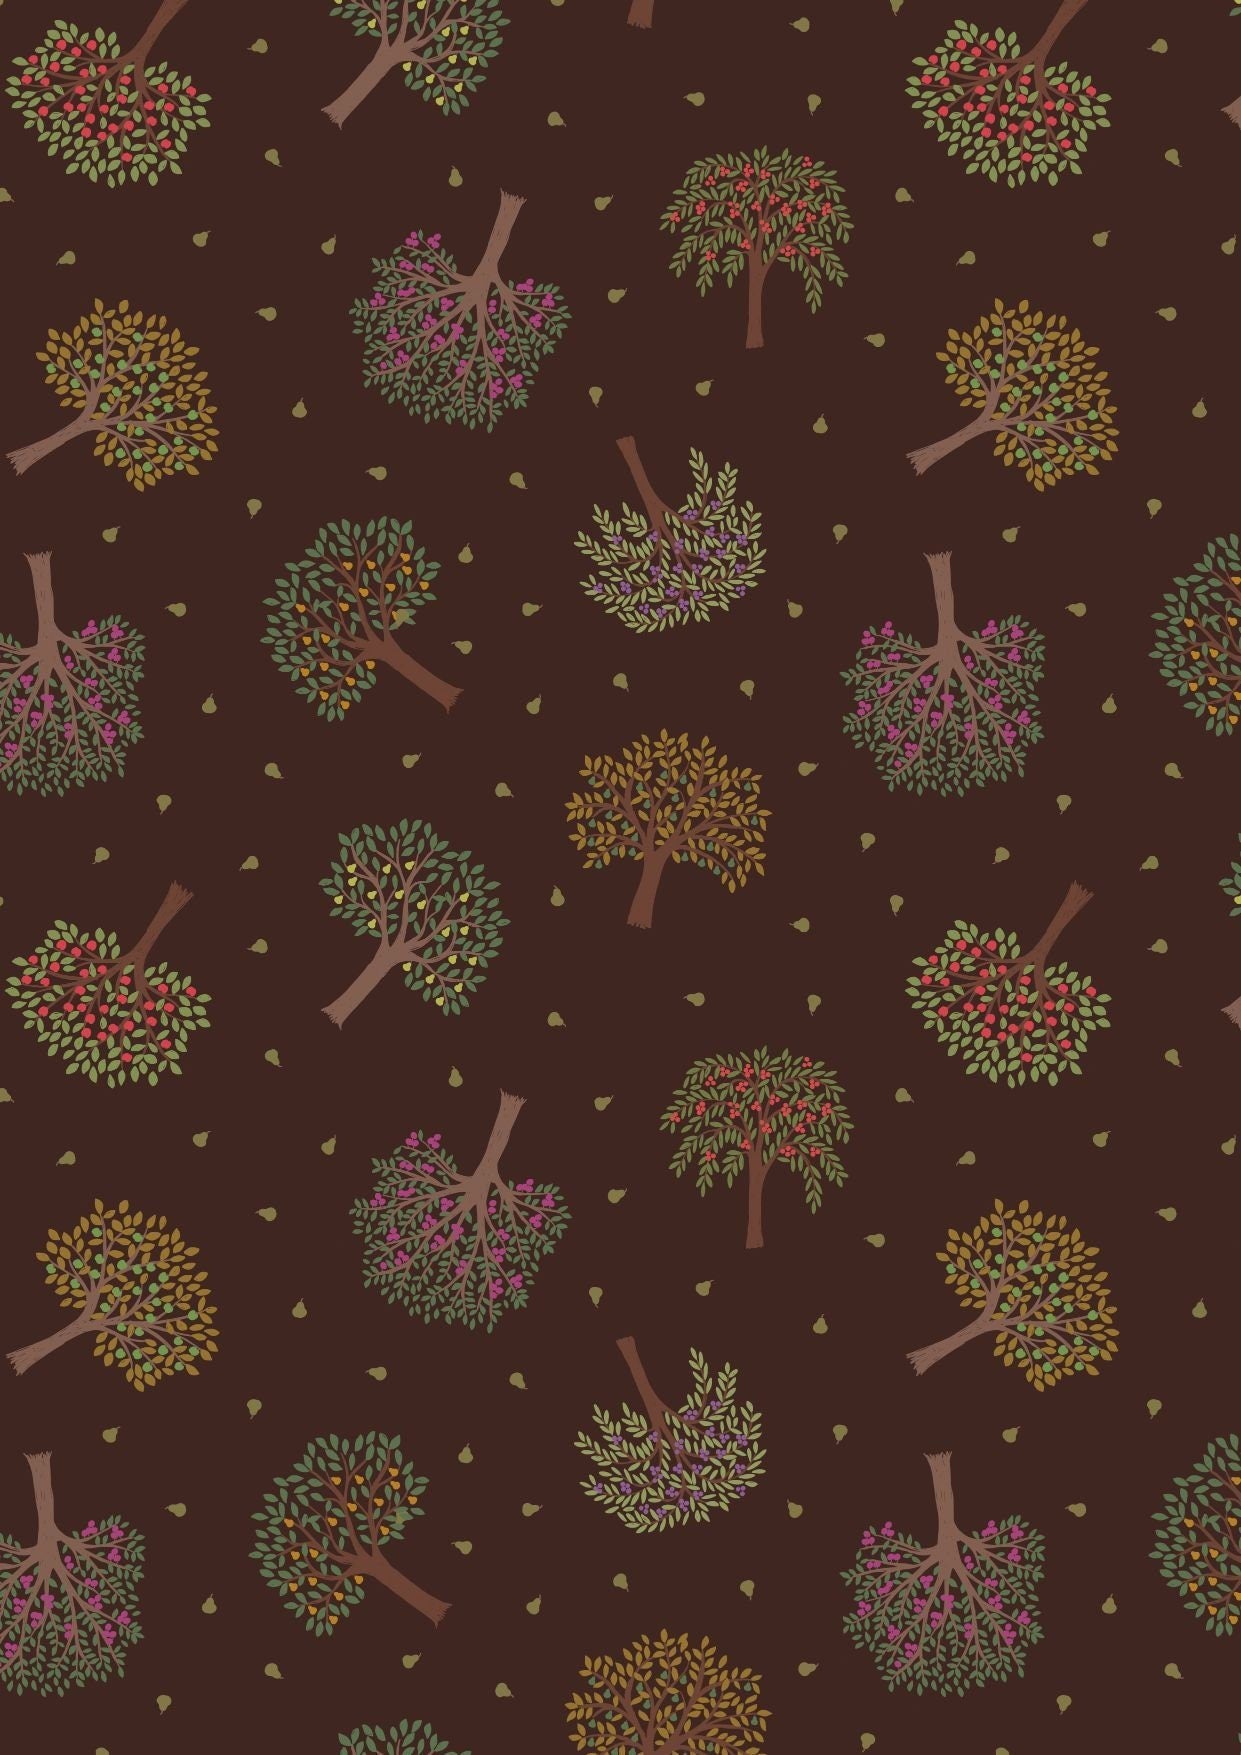 The Orchard Trees on Dark Brown A497.3 Cotton Woven Fabric